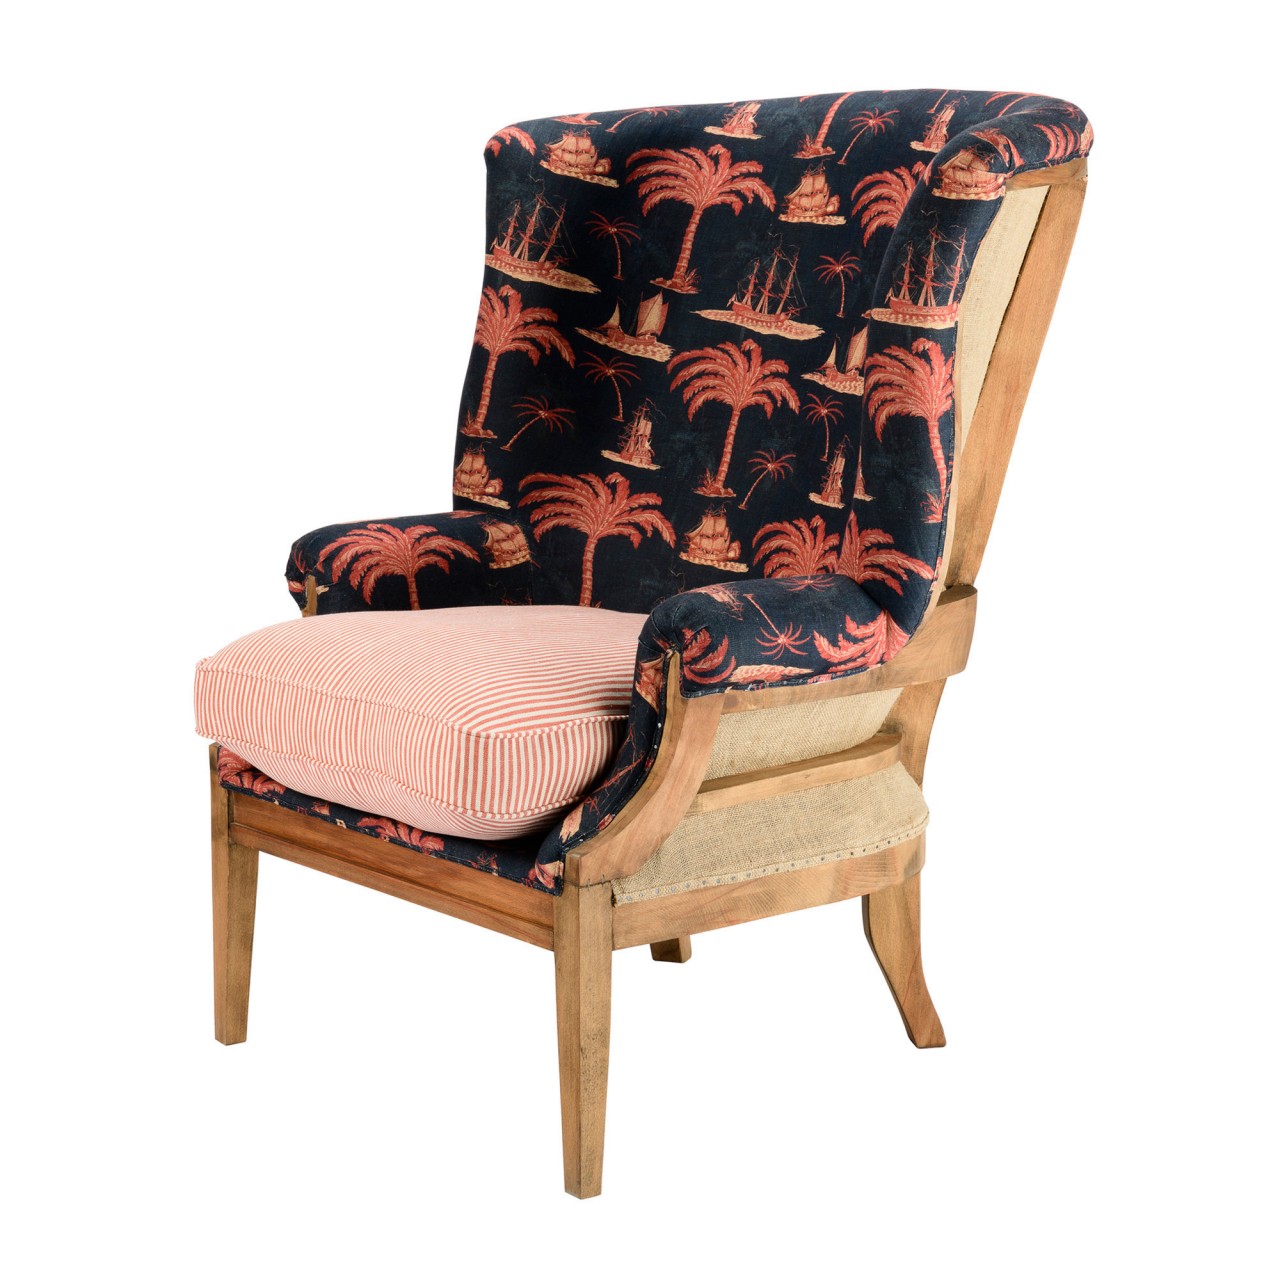 WILLIAM DECONSTRUCTED WING CHAIR - AEGEAN Indigo Fabric and RHUBARB STRIPE Linen